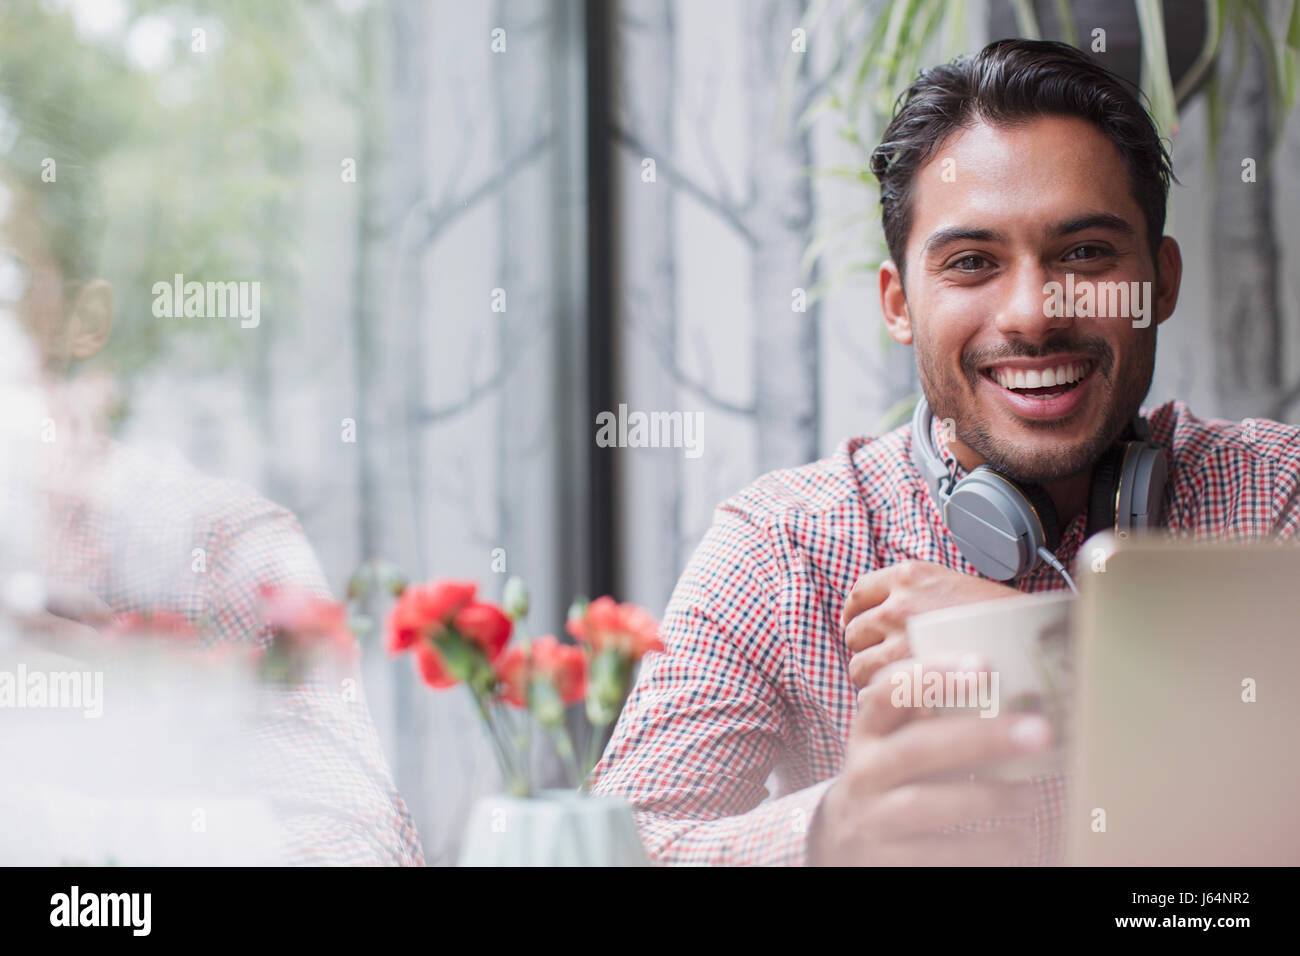 Portrait smiling young man with headphones drinking coffee at laptop in cafe window Stock Photo